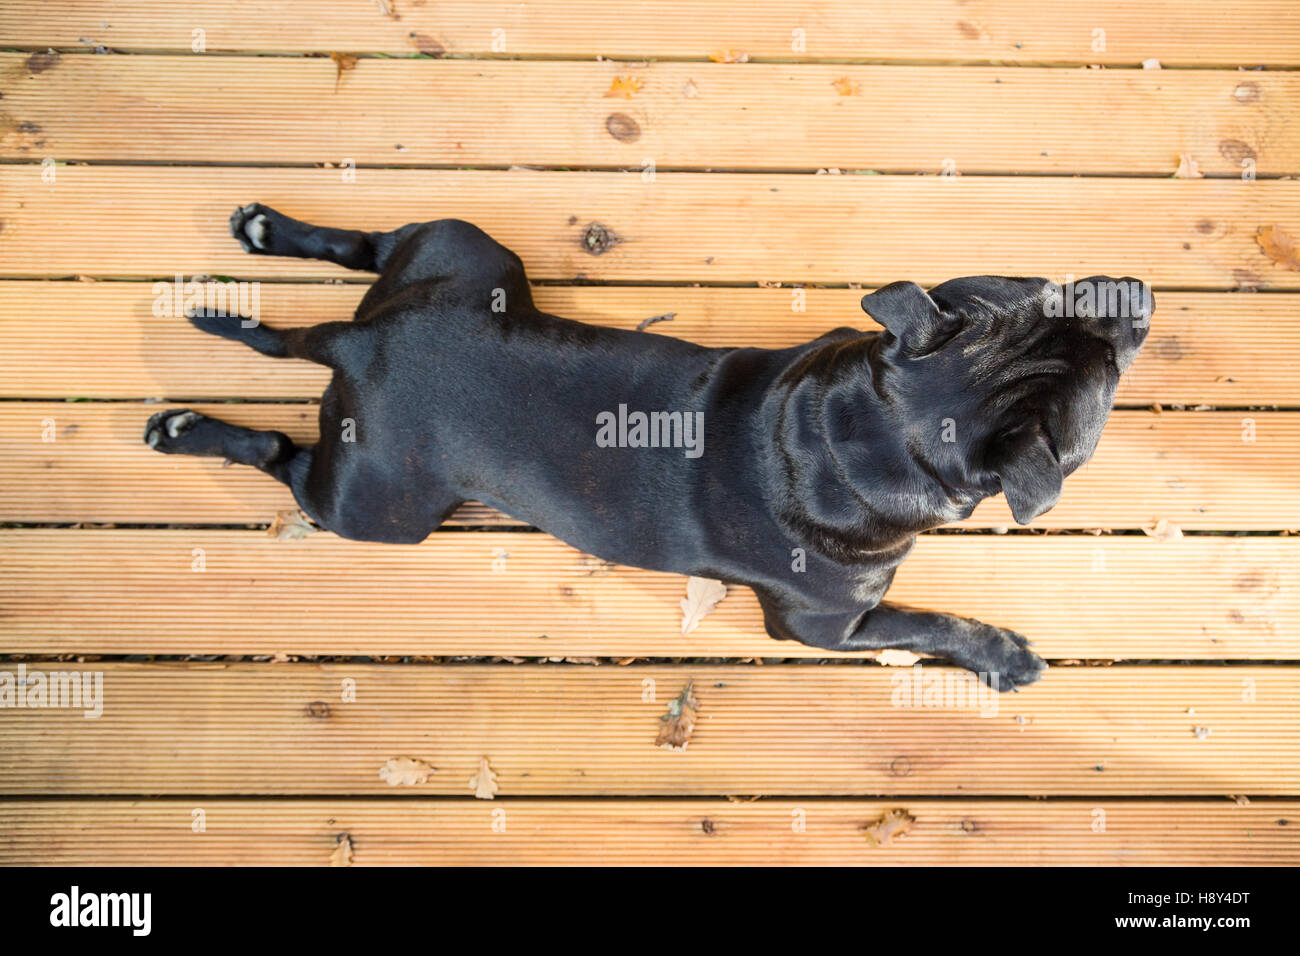 A handsome black Staffordshire Bull Terrier dog lying on wooden decking. his coat is shiny, he is not wearing a collar. Seen fro Stock Photo